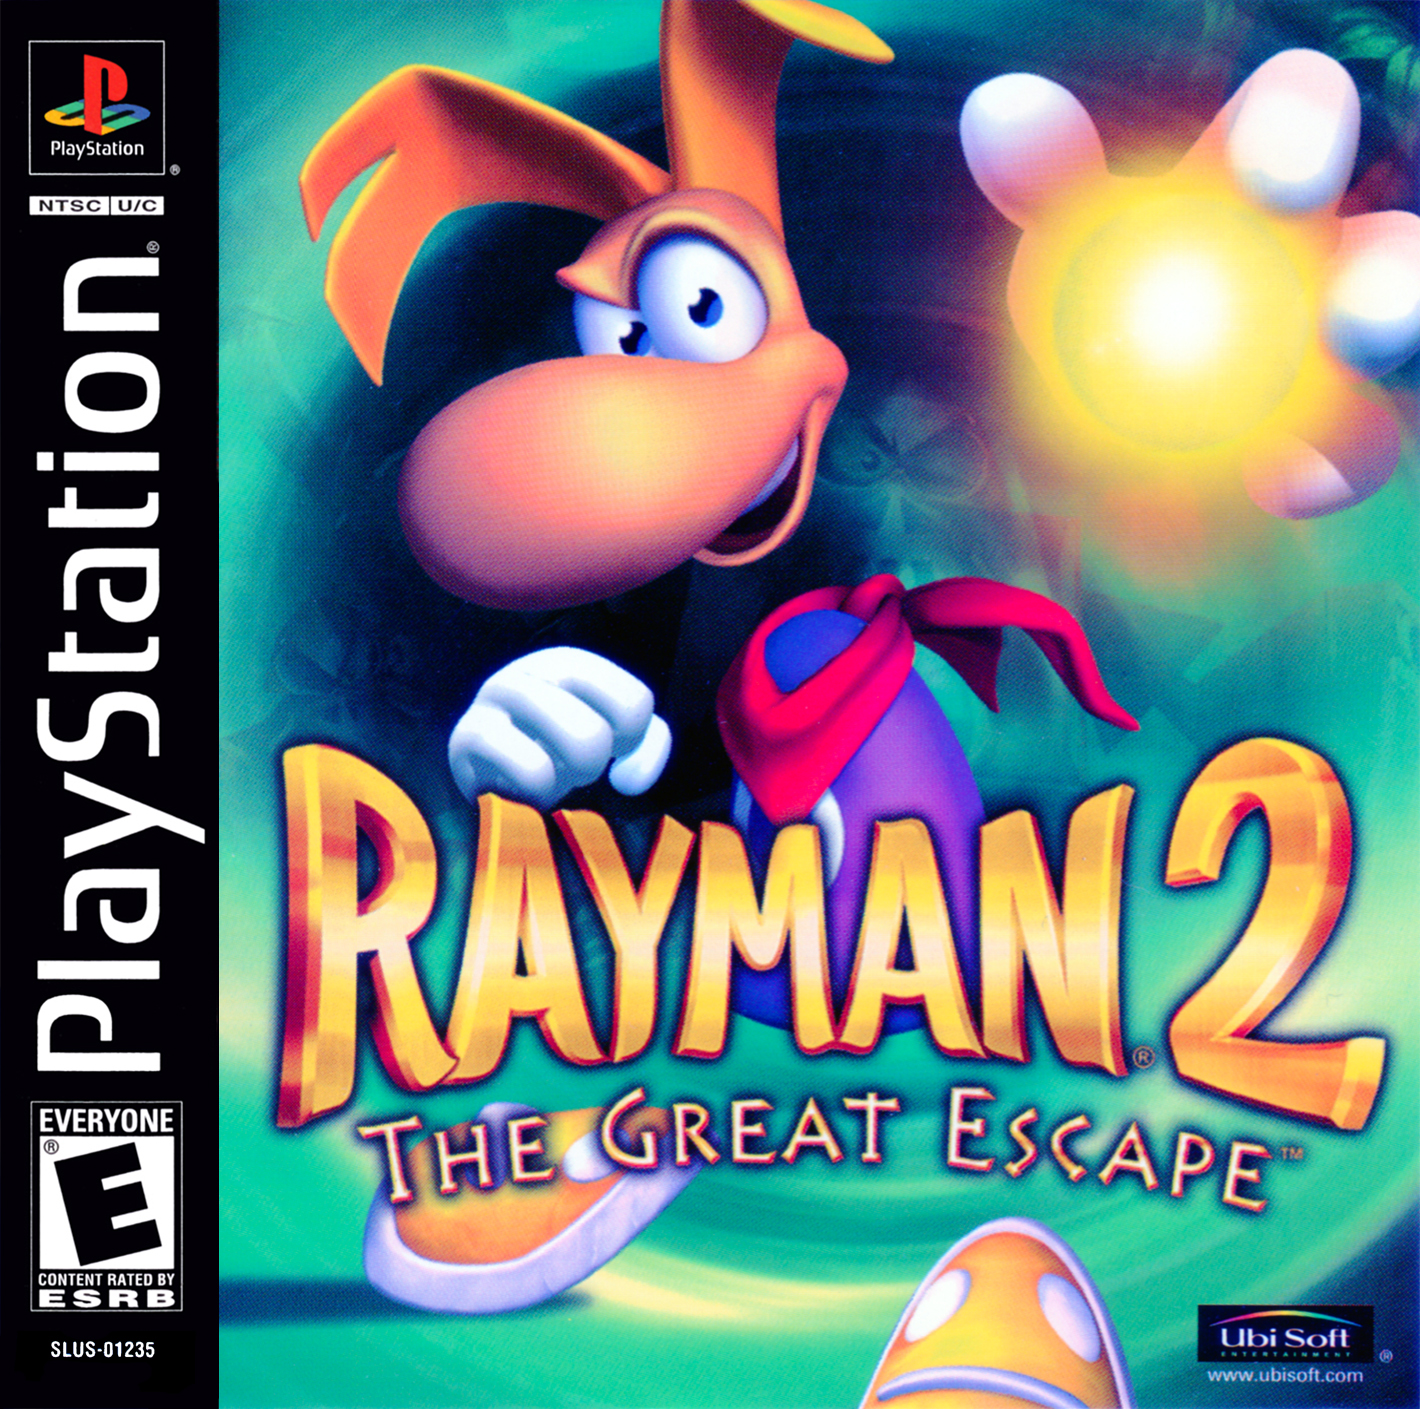 rayman-2-the-great-escape-details-launchbox-games-database